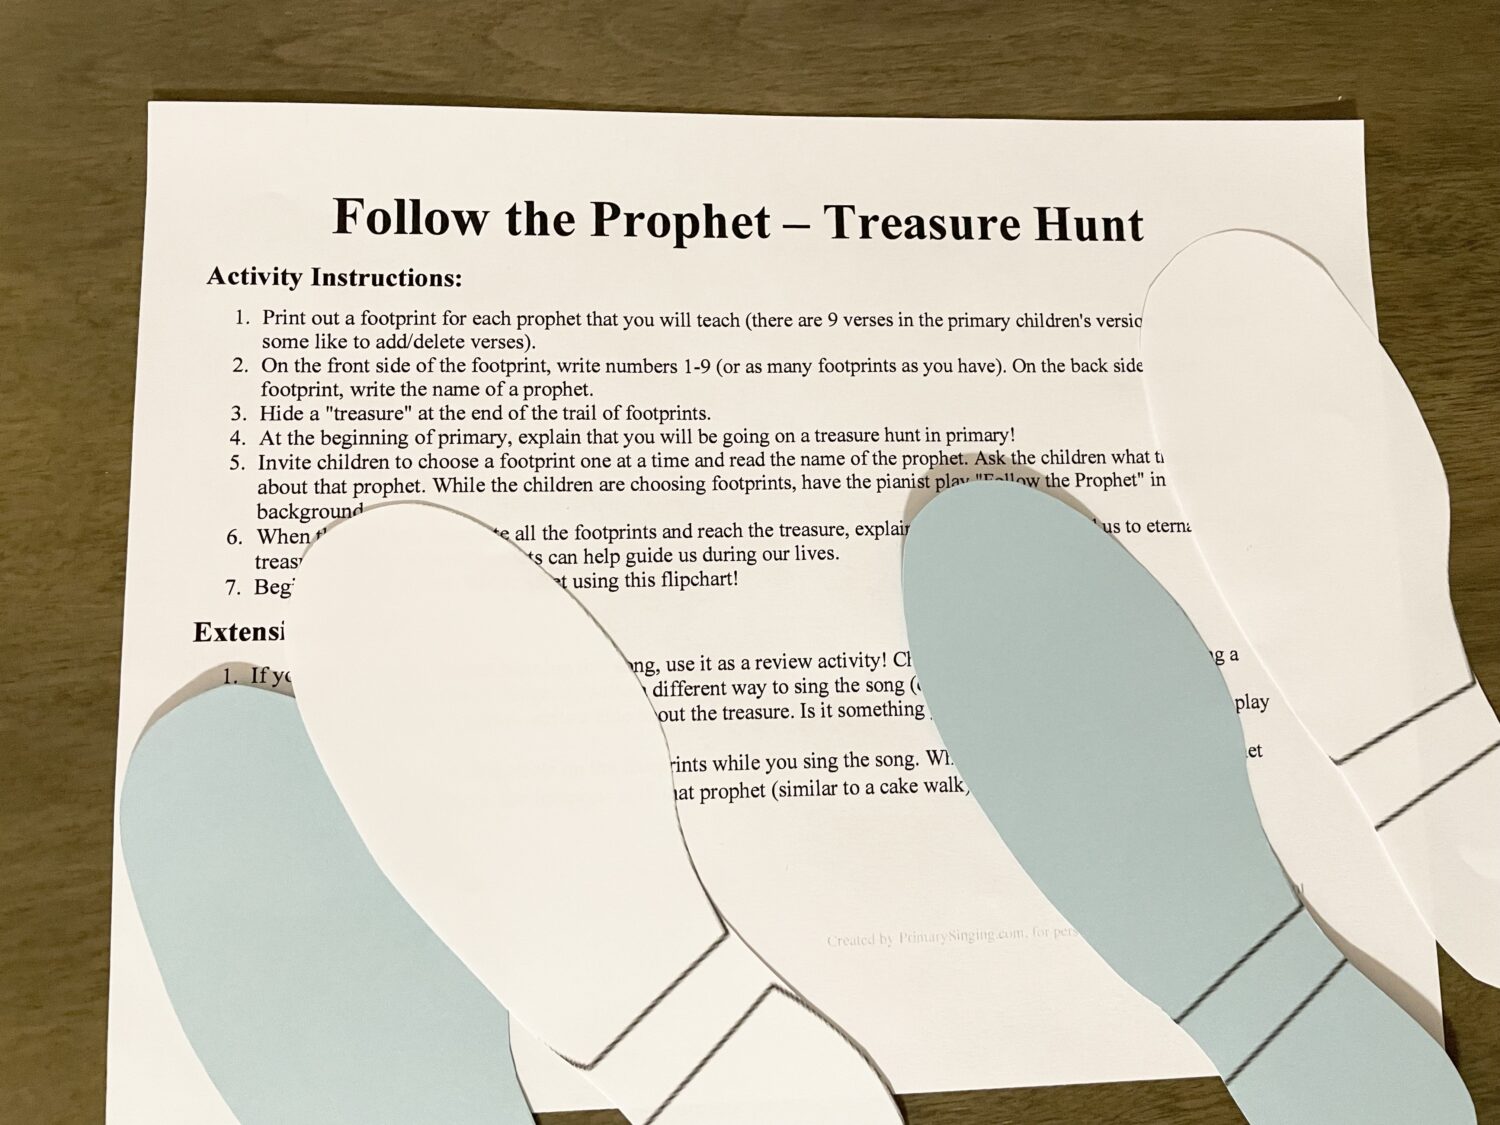 Follow the Prophet Treasure Hunt Singing time ideas for Primary Music Leaders IMG 6100 e1645738841846